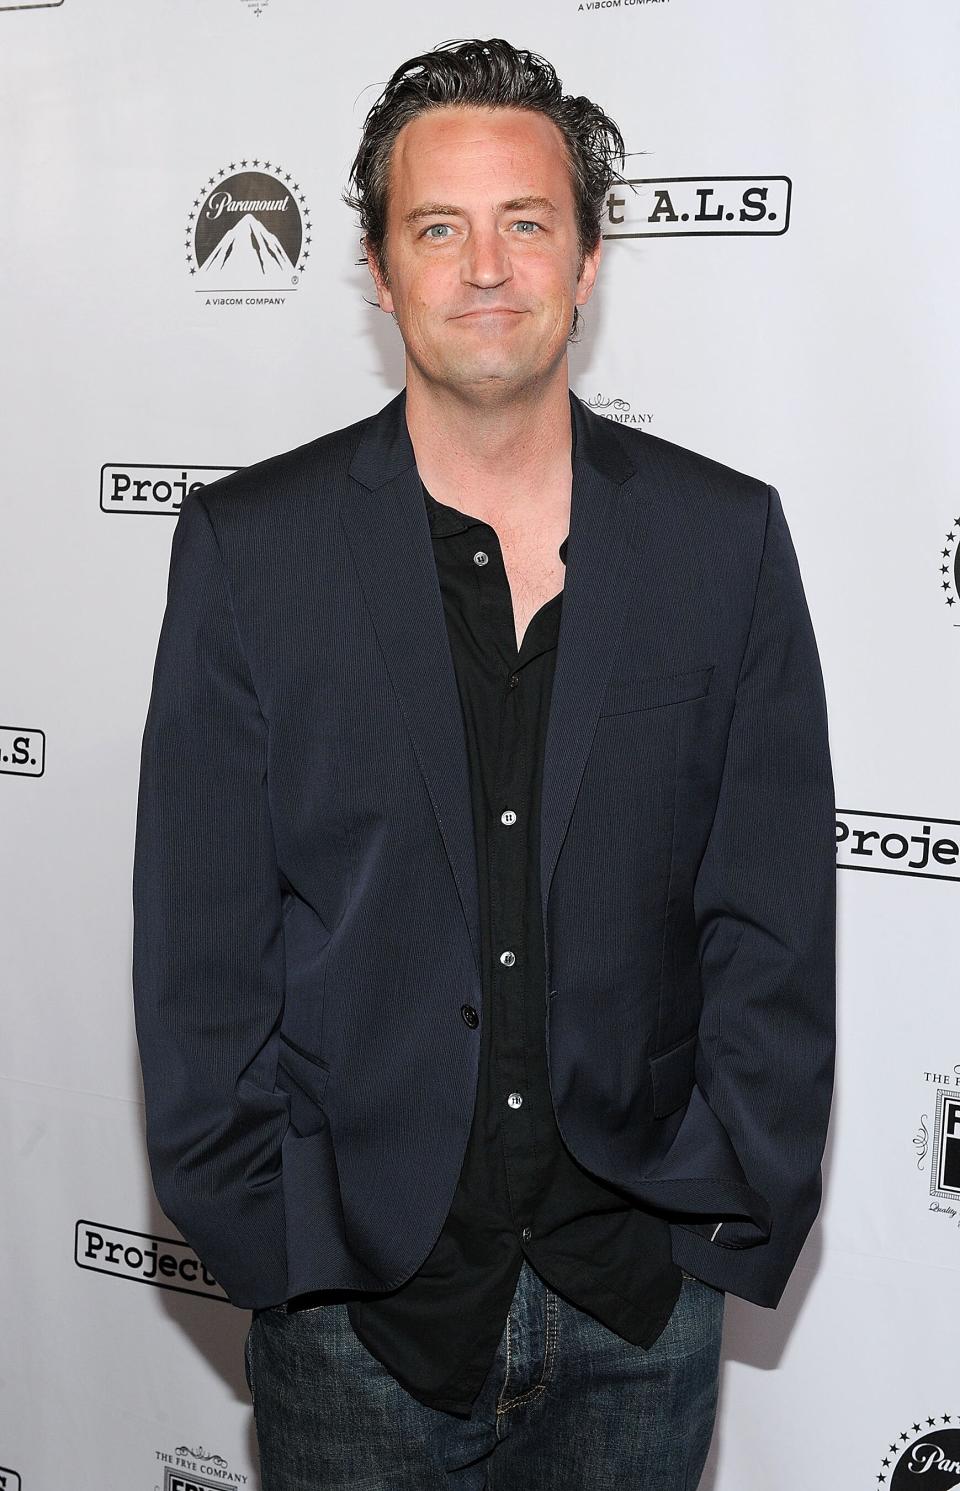 Who Is Matthew Perry's Stepfather?